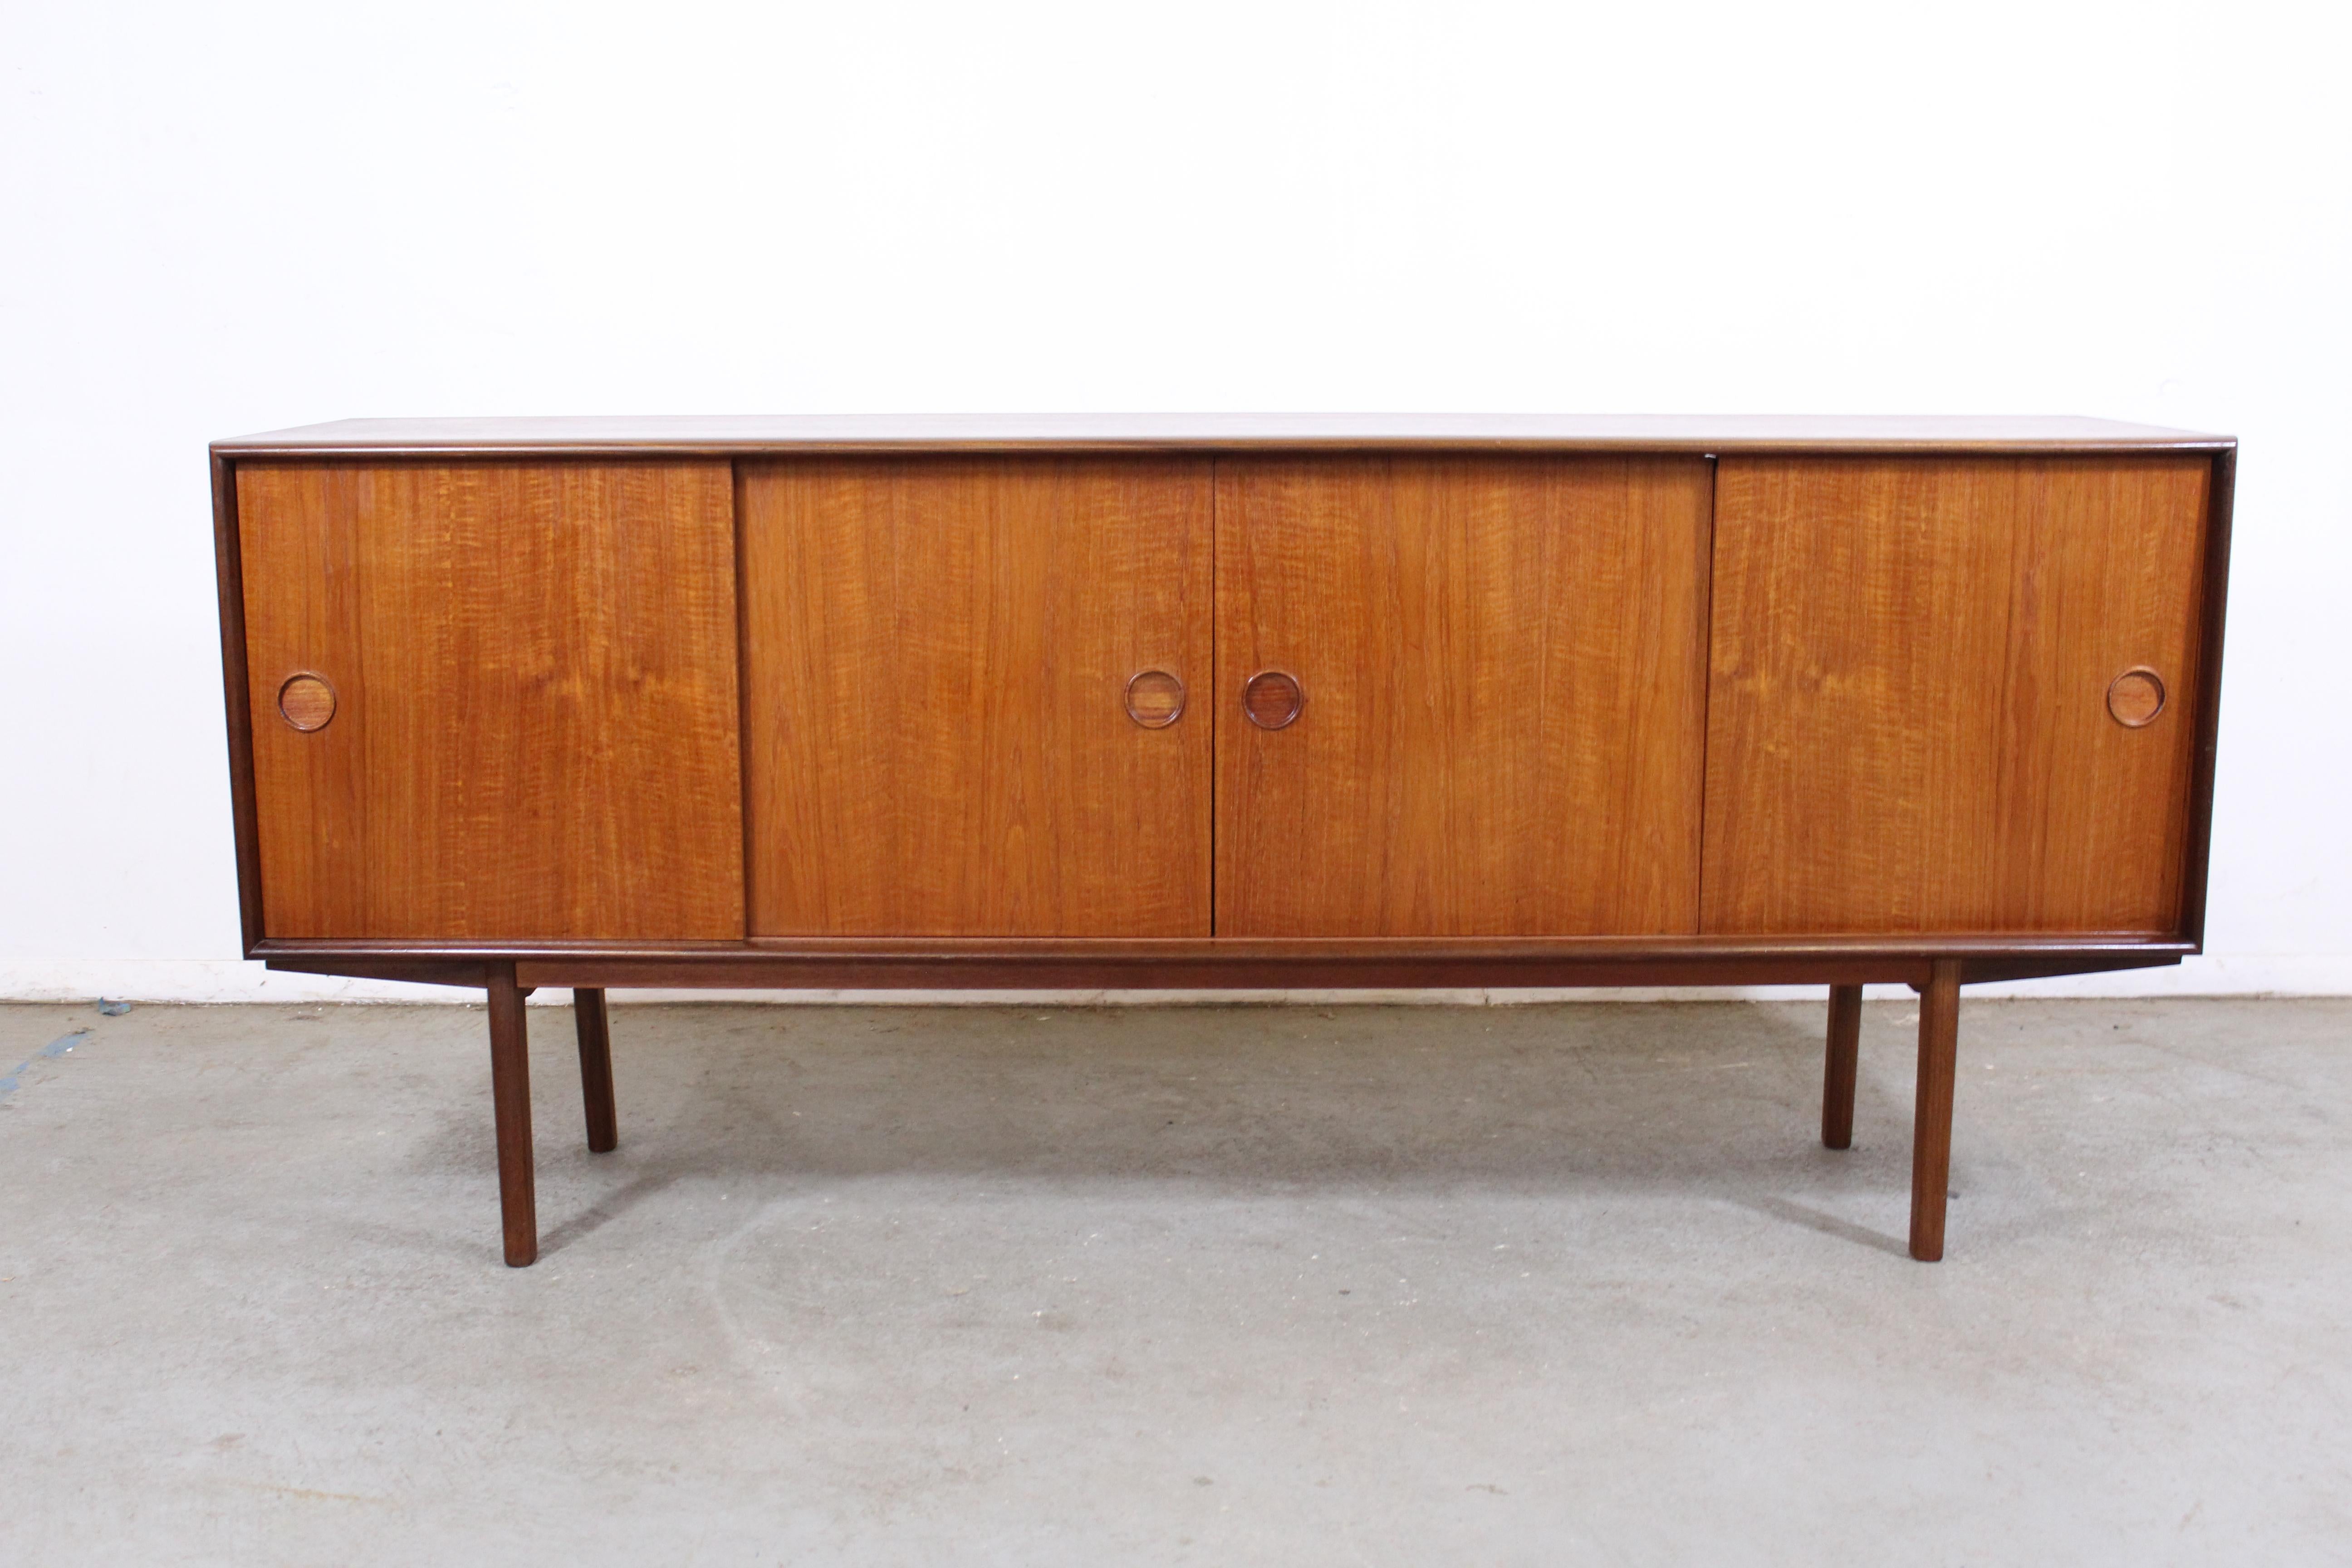 Mid-Century Danish Modern Teak Credenza

Offered is a teak credenza. Features 4 sliding doors with shelving, 1 drawer. Contains green felt on the inside. It is in good condition, showing some age wear, (surface scratches/chips, stain on top, fray